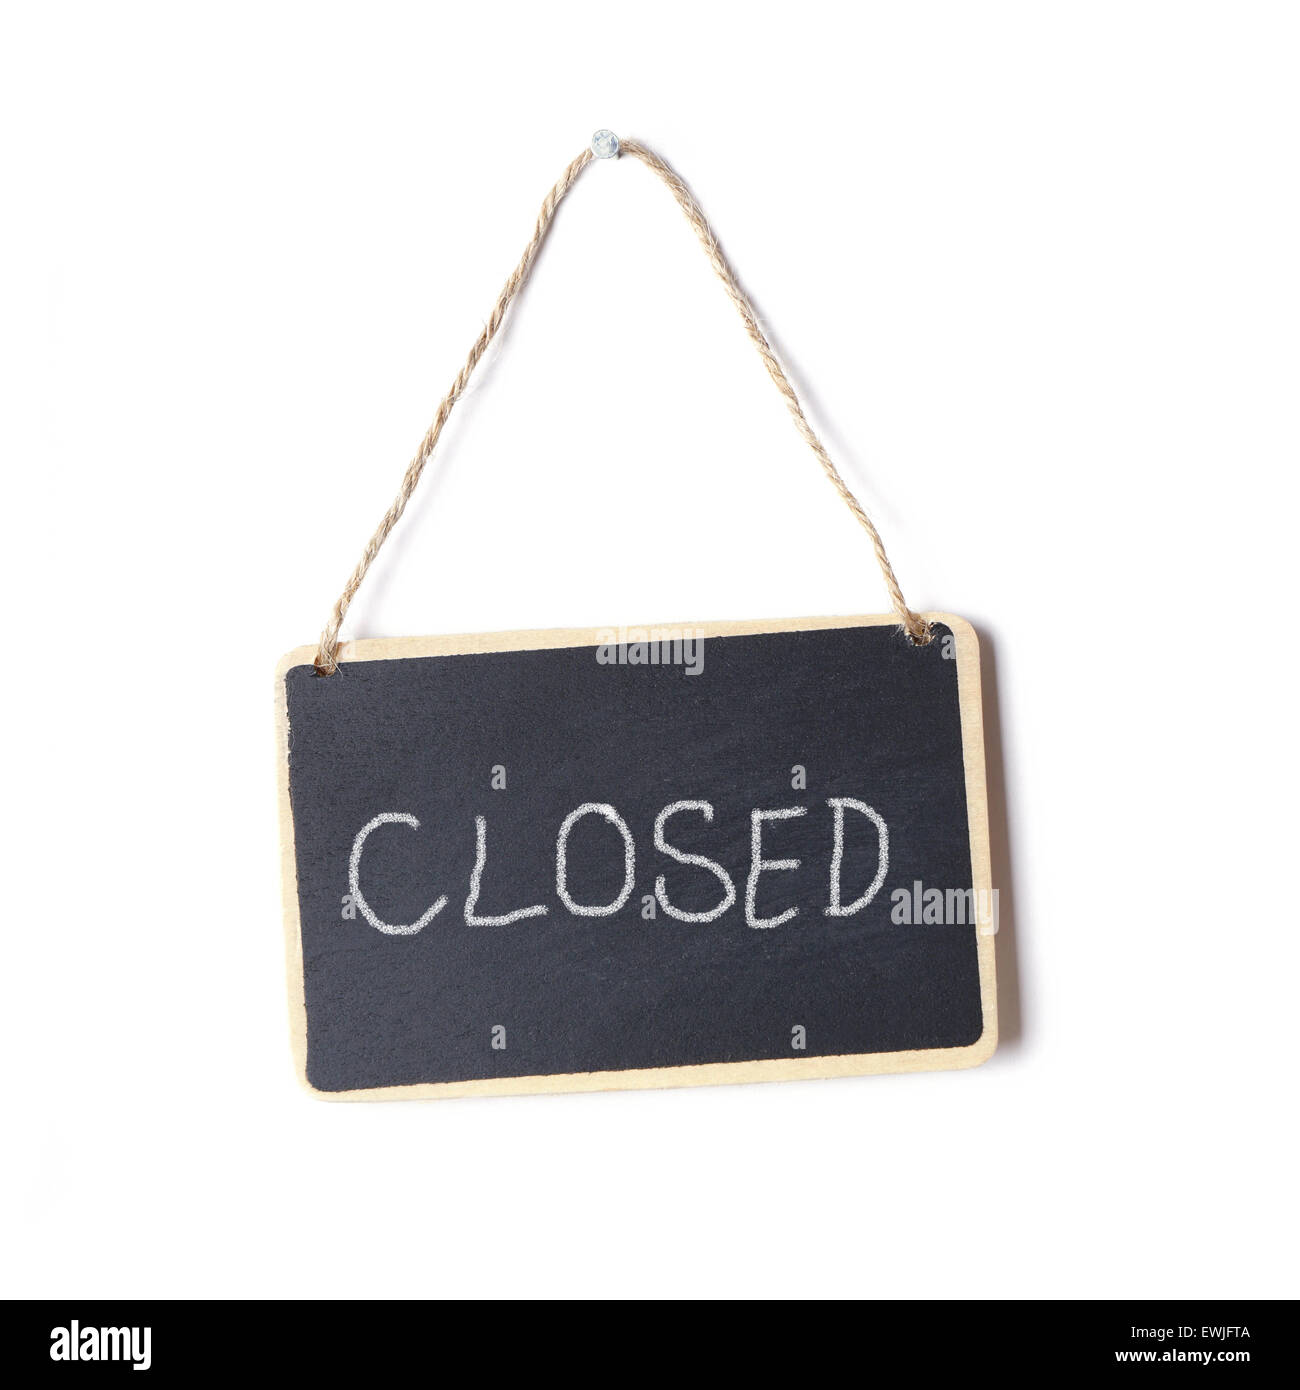 closed sign Stock Photo